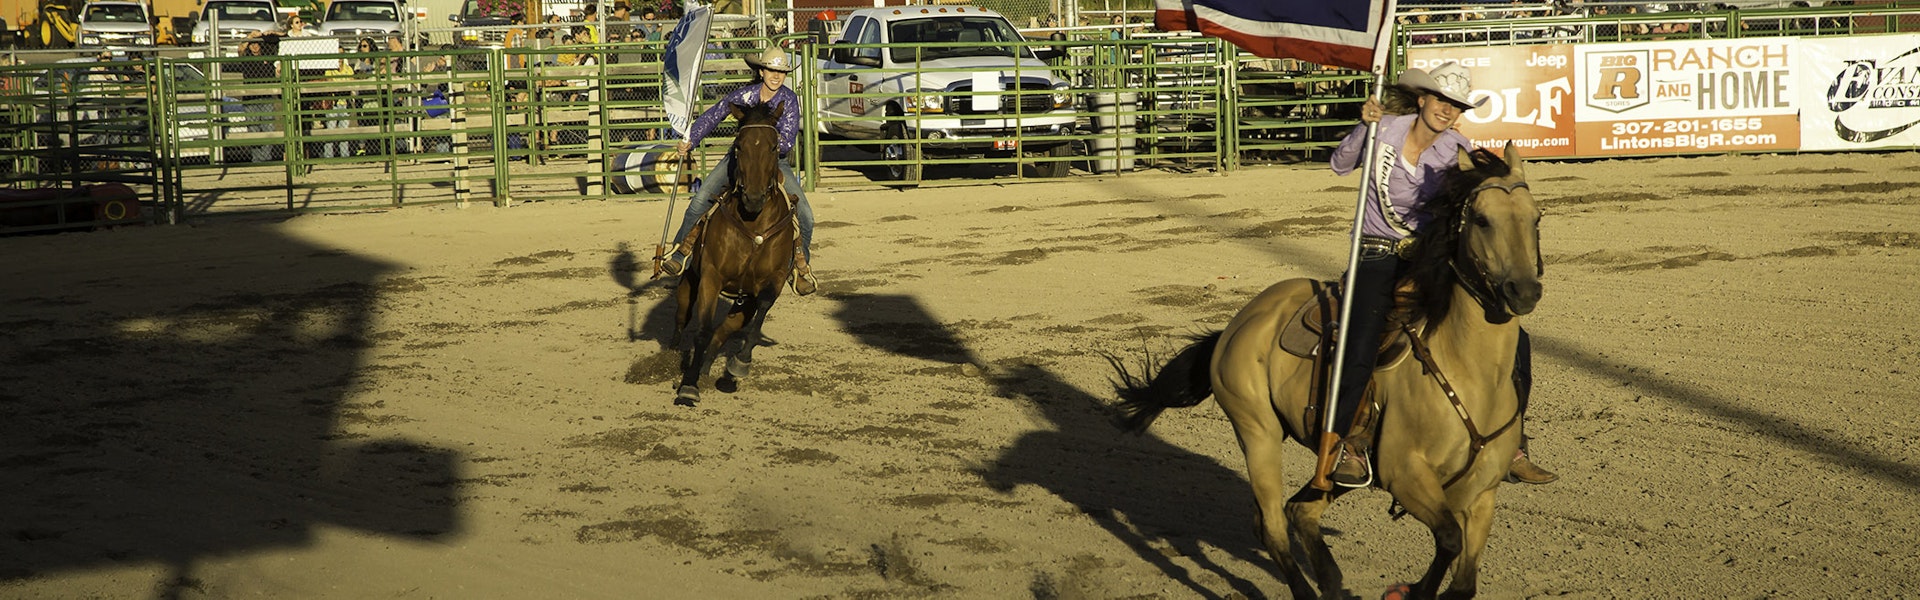 Putting the flag on display at the Jackson Hole Rodeo